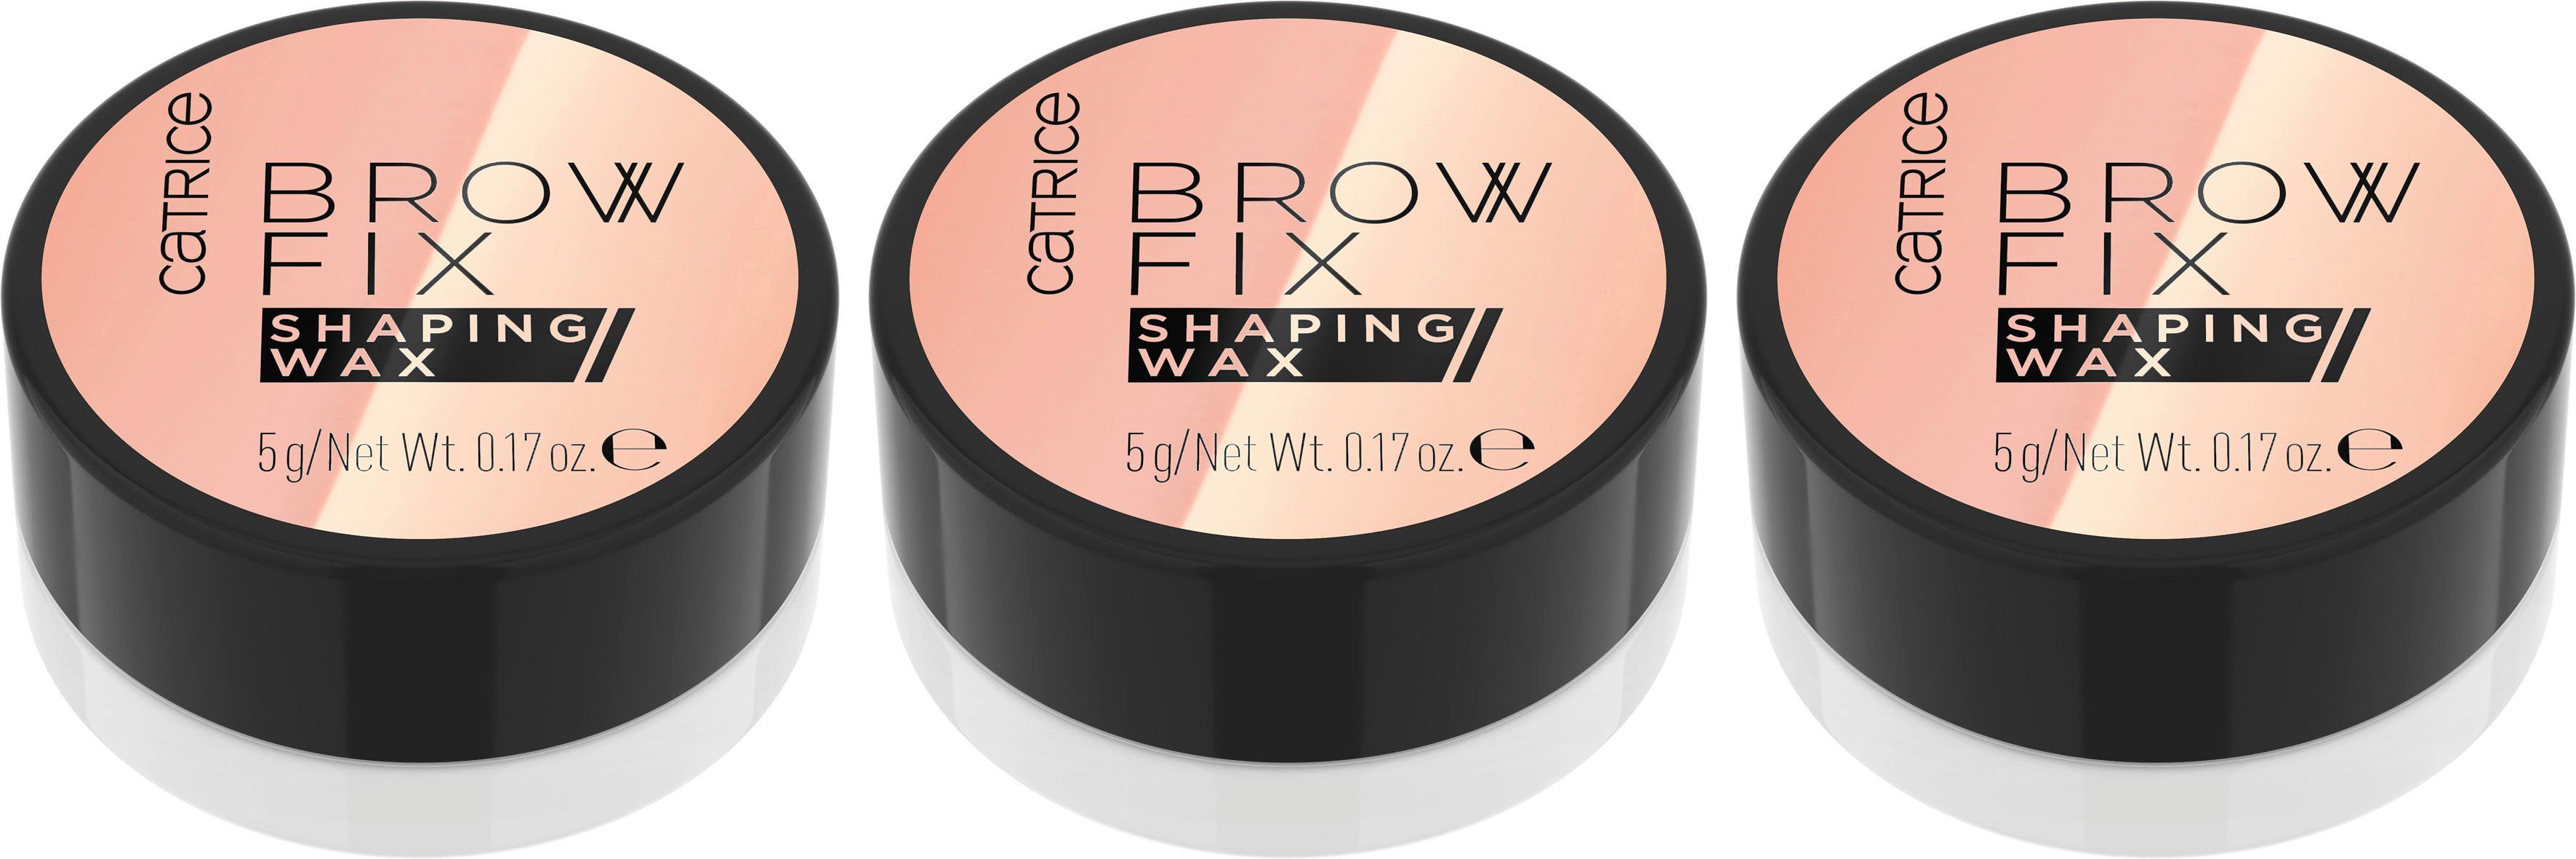 Catrice Augenbrauen-Gel Catrice Brow Fix Shaping Wax 010,